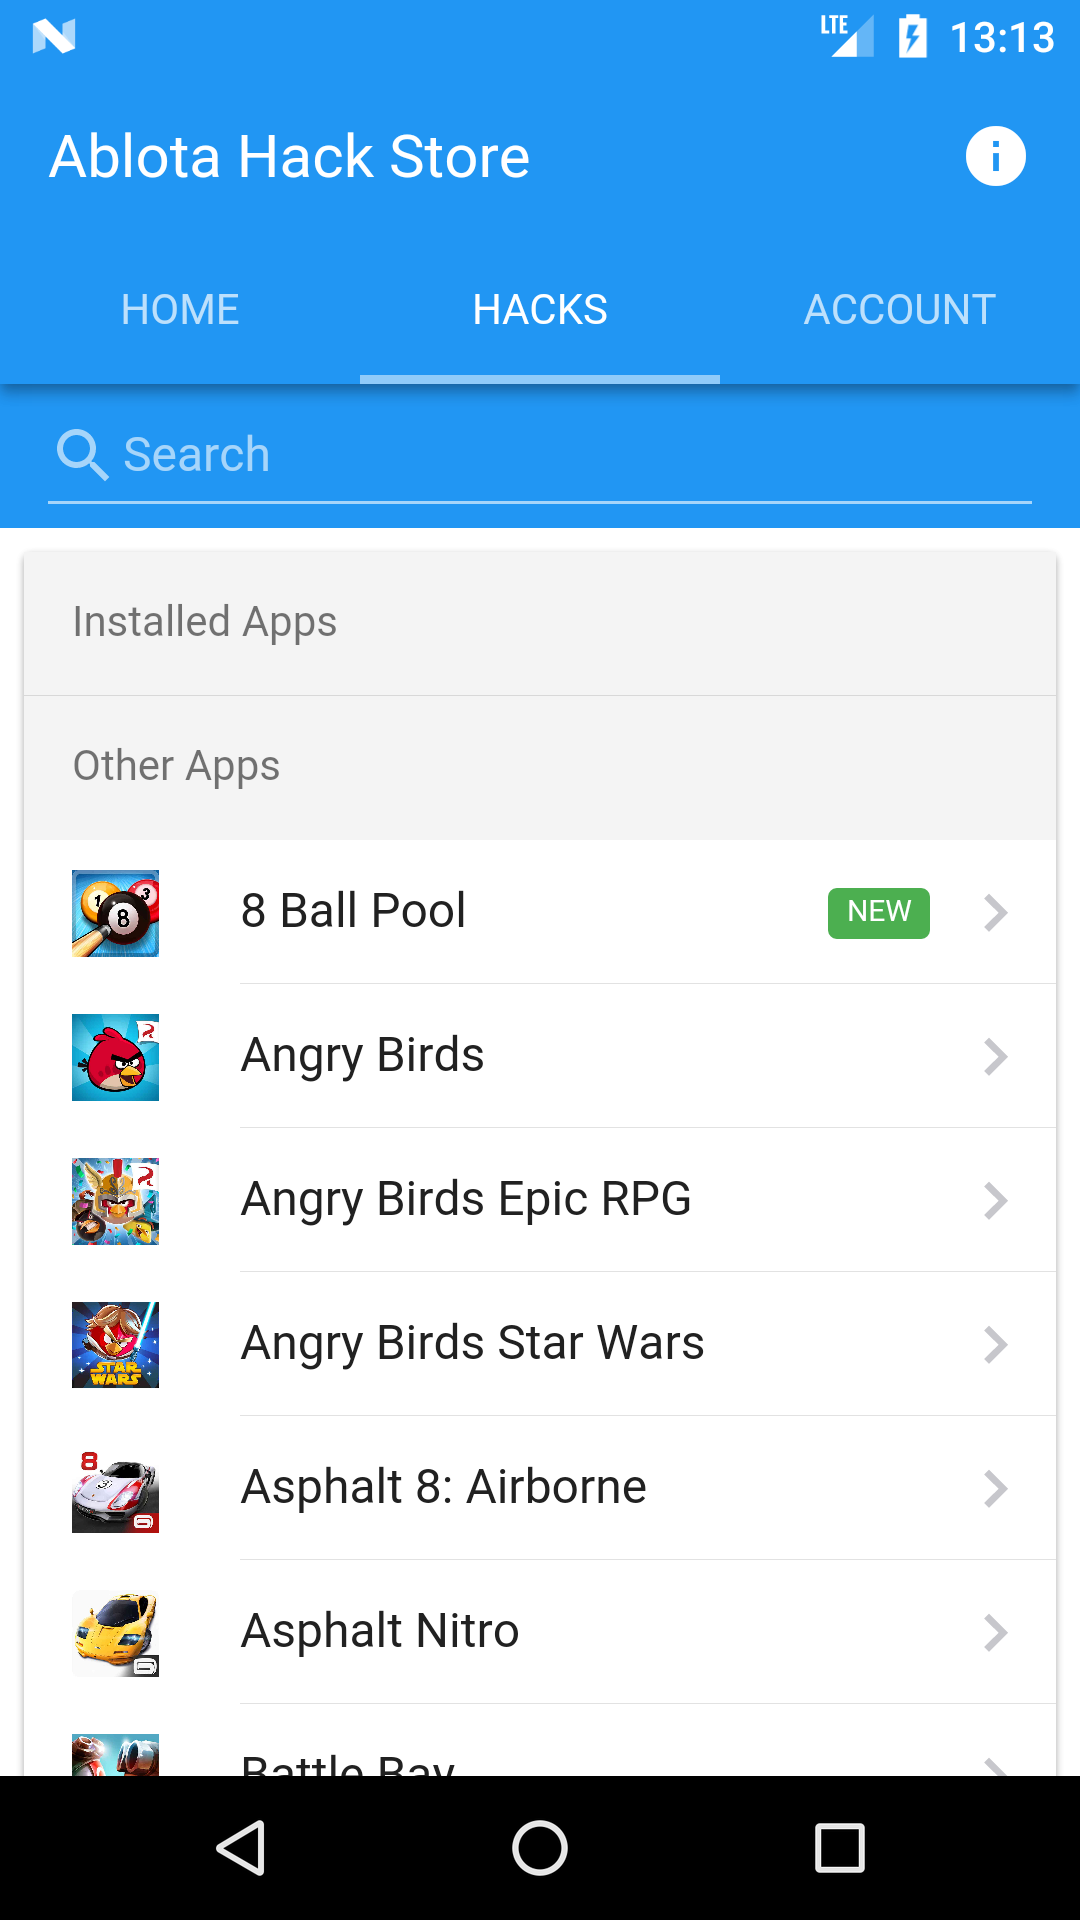 Ablota Hack Store Pro (Cydia) for Android - APK Download - 